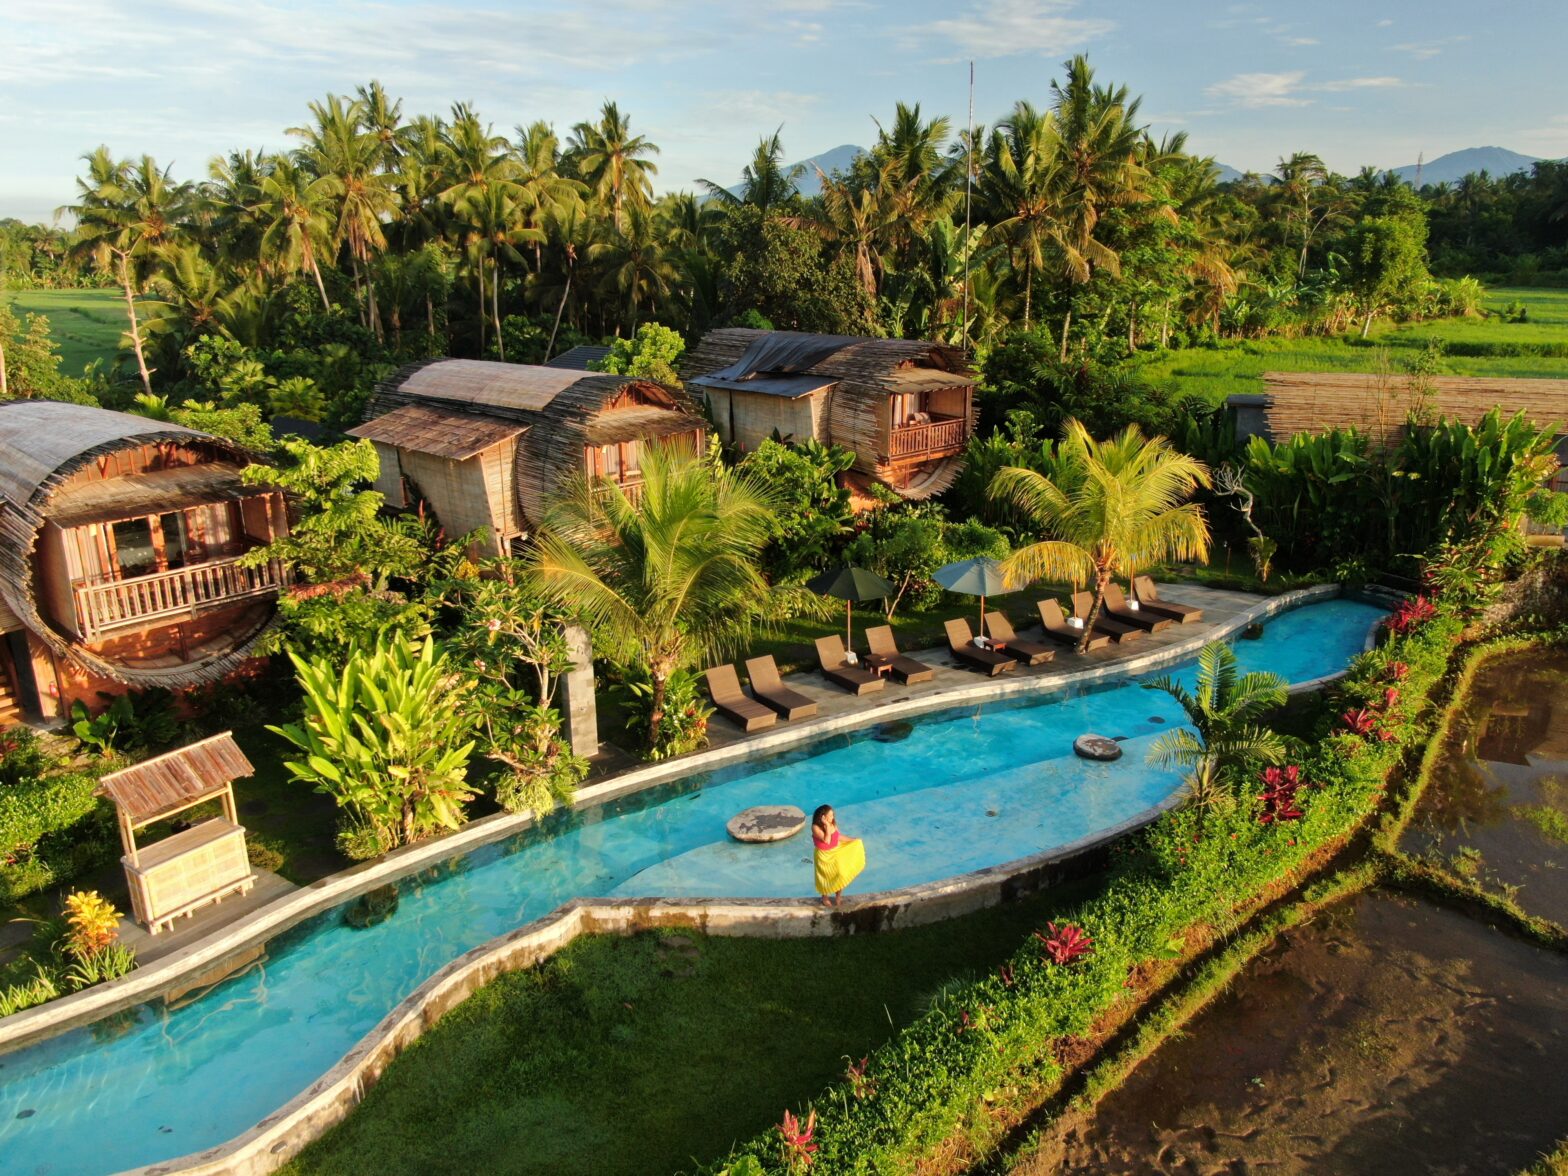 The Beehouse Dijiwa in Ubud, Bali is the Perfect Unique Stay